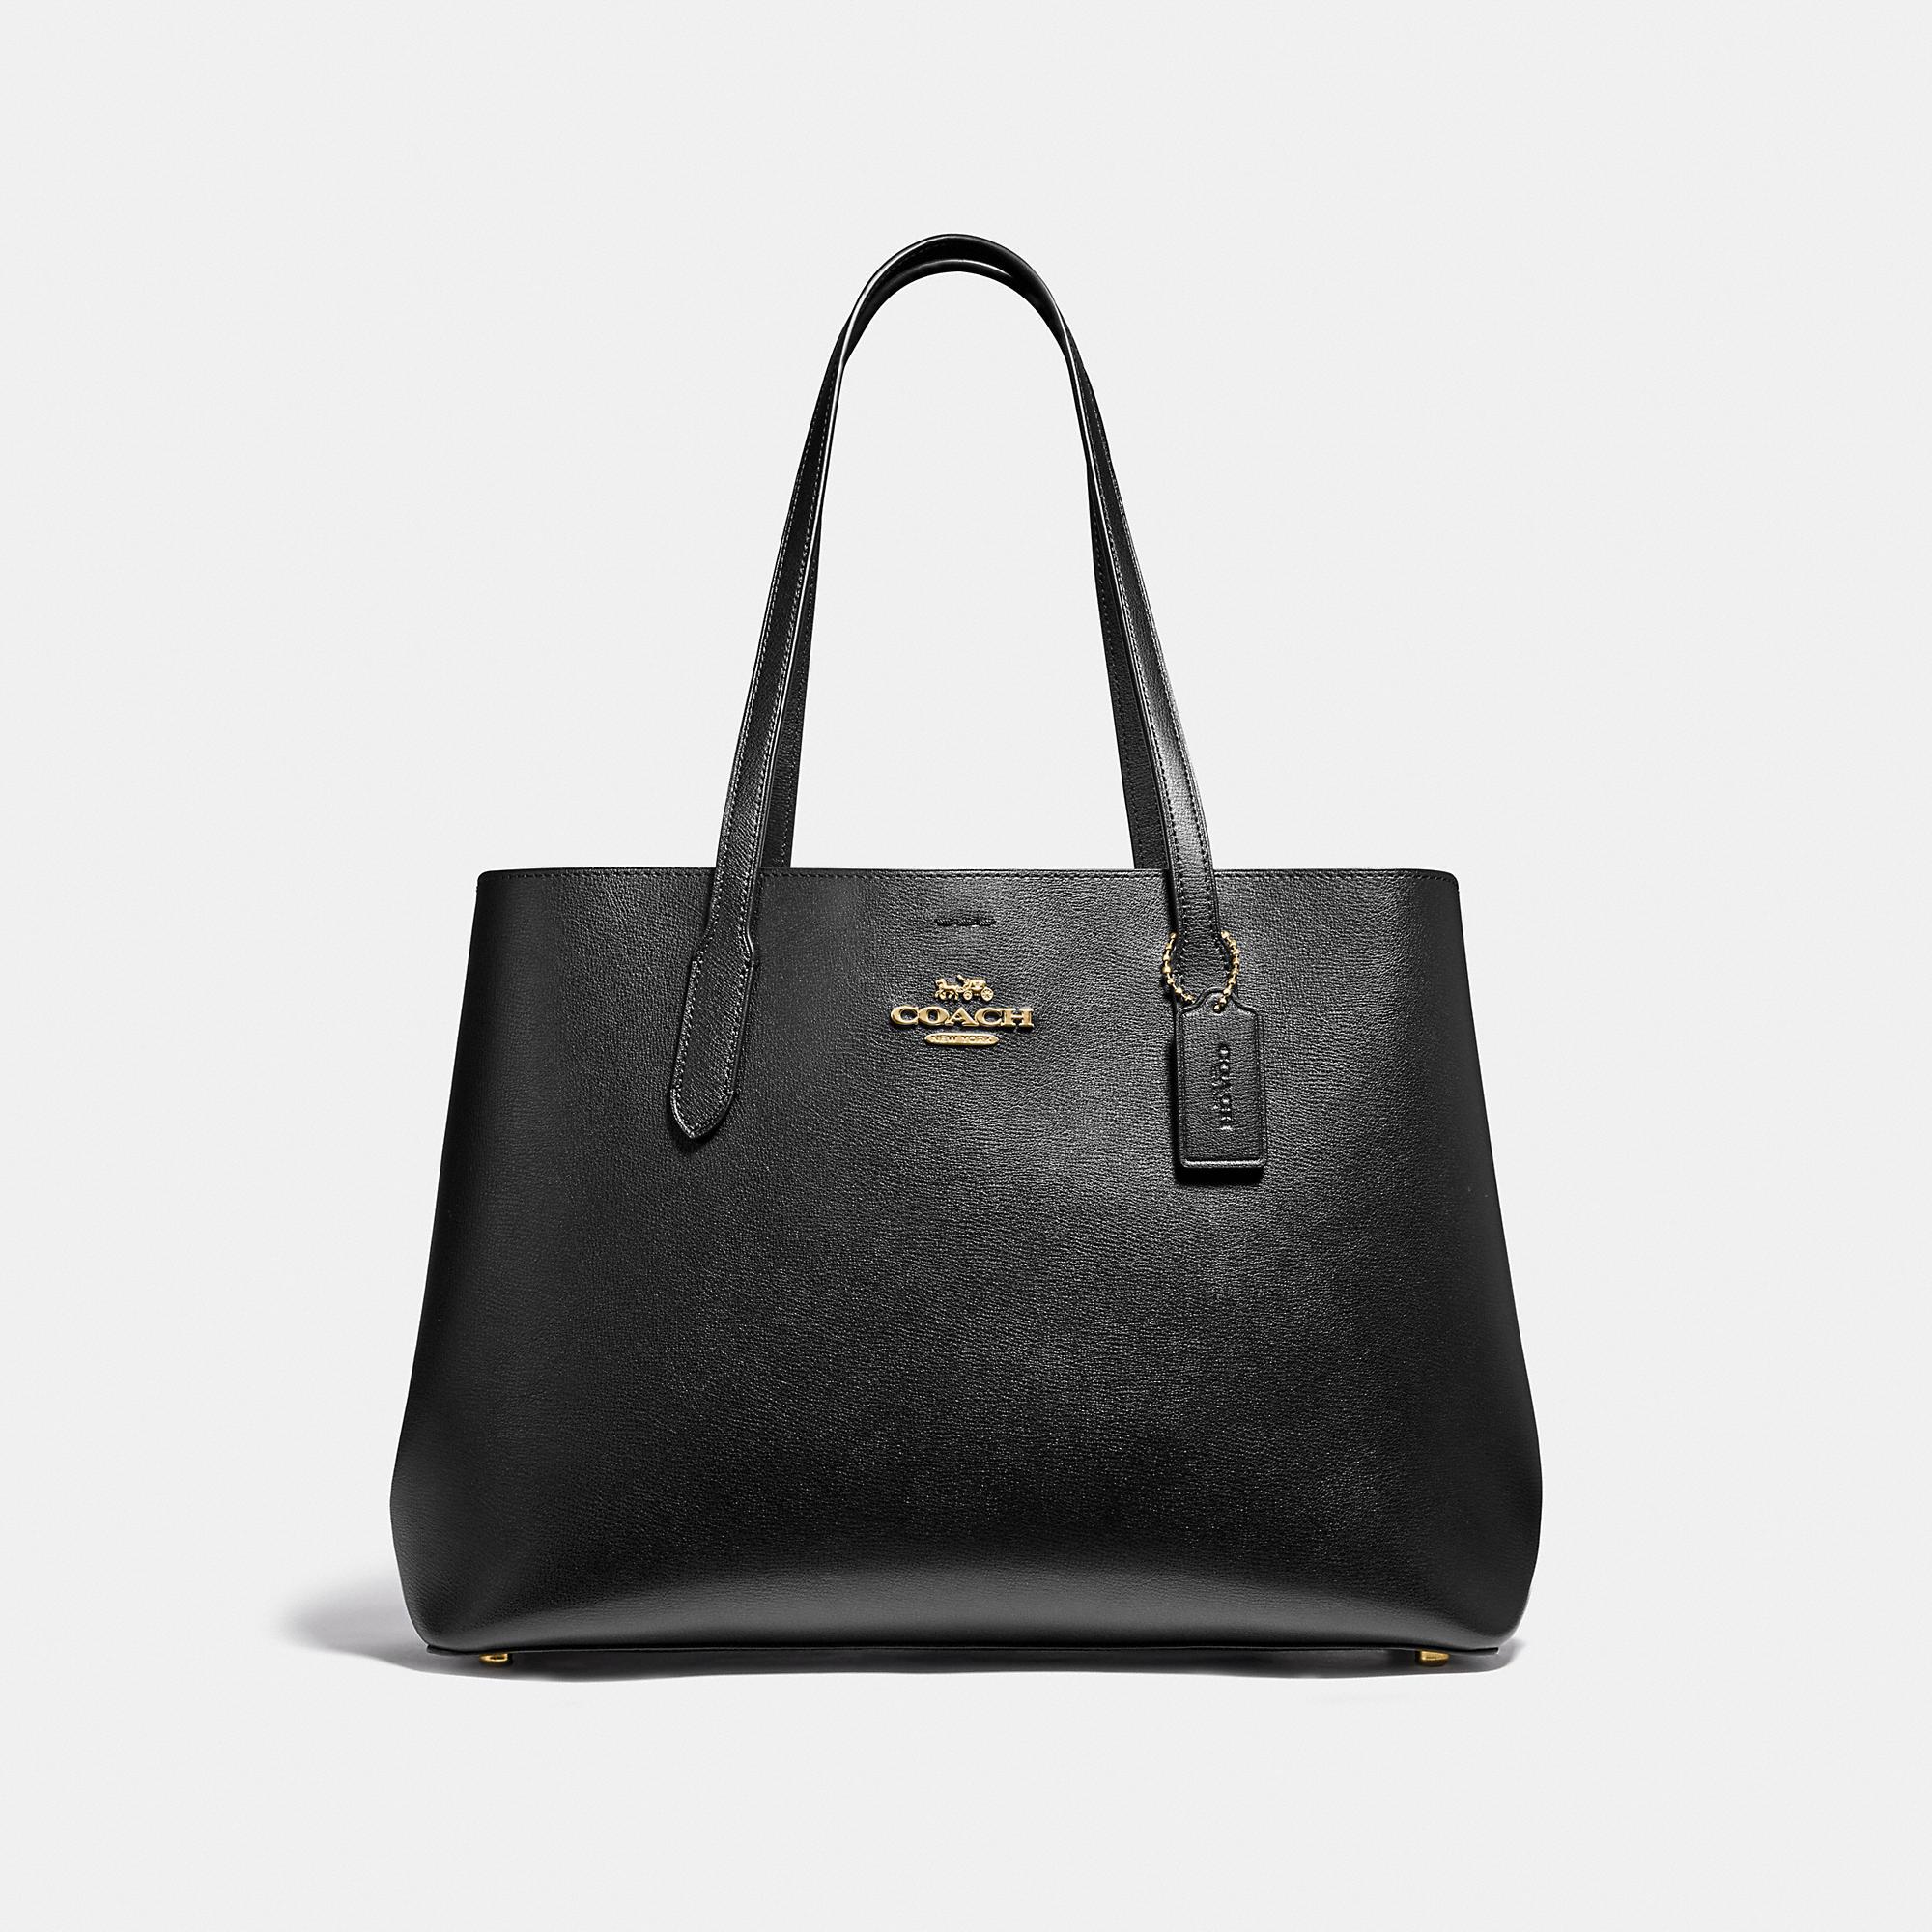 COACH Large Avenue Carryall in Black | Lyst